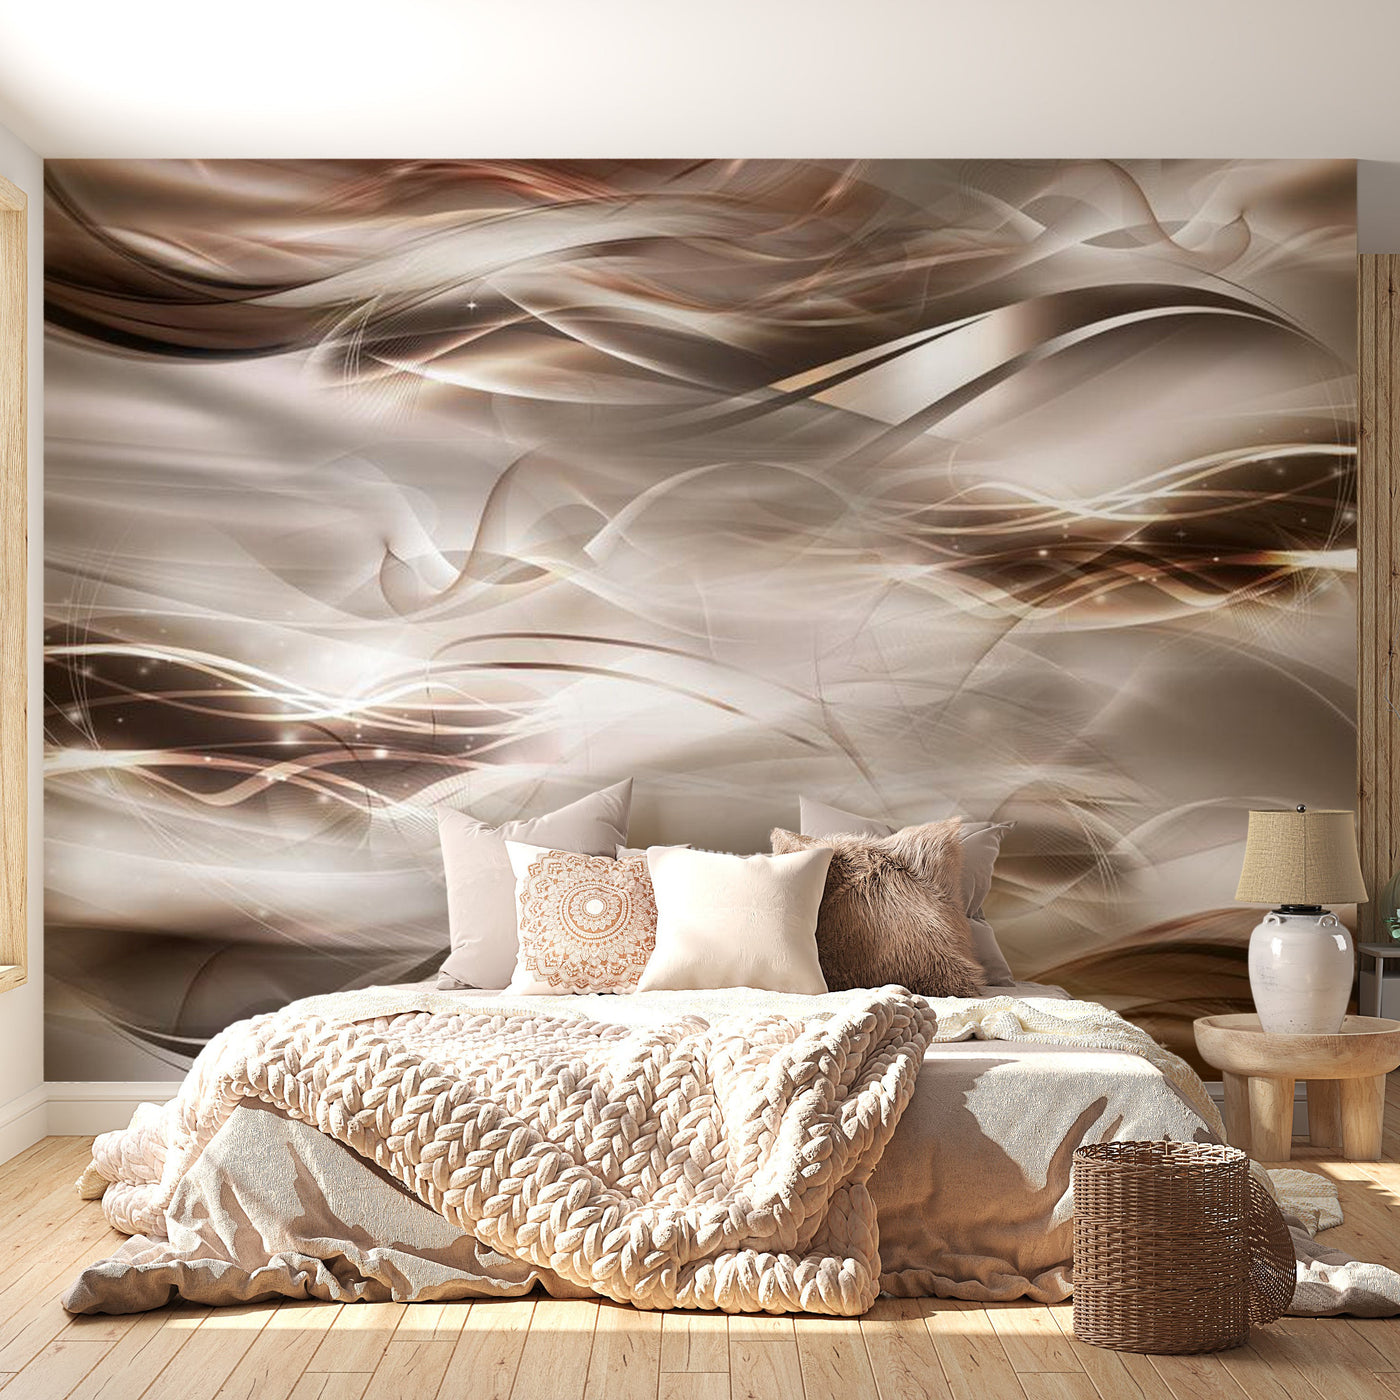 Peel & Stick Glam Wall Mural - Umber Waves - Removable Wall Decals